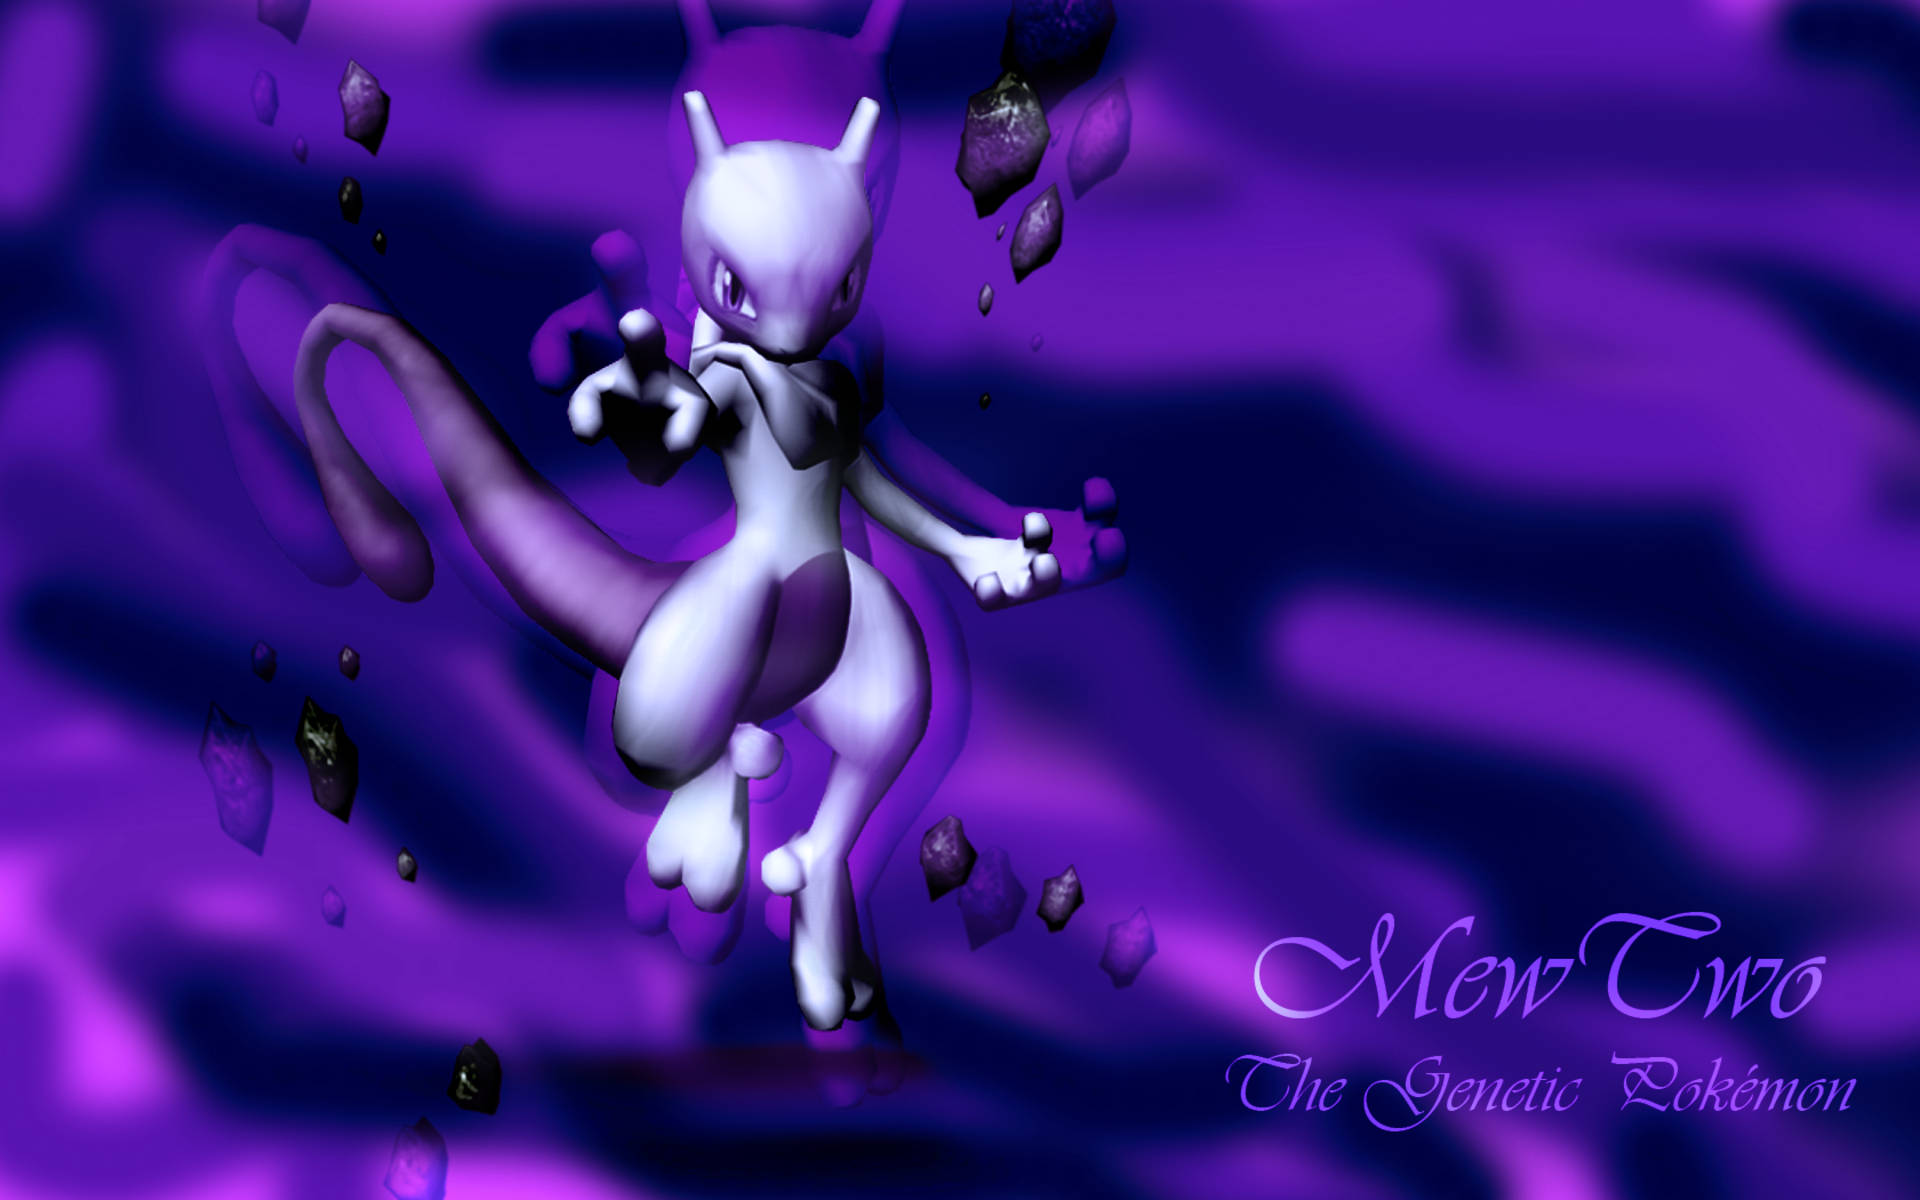 Mewtwo Armor Wallpapers